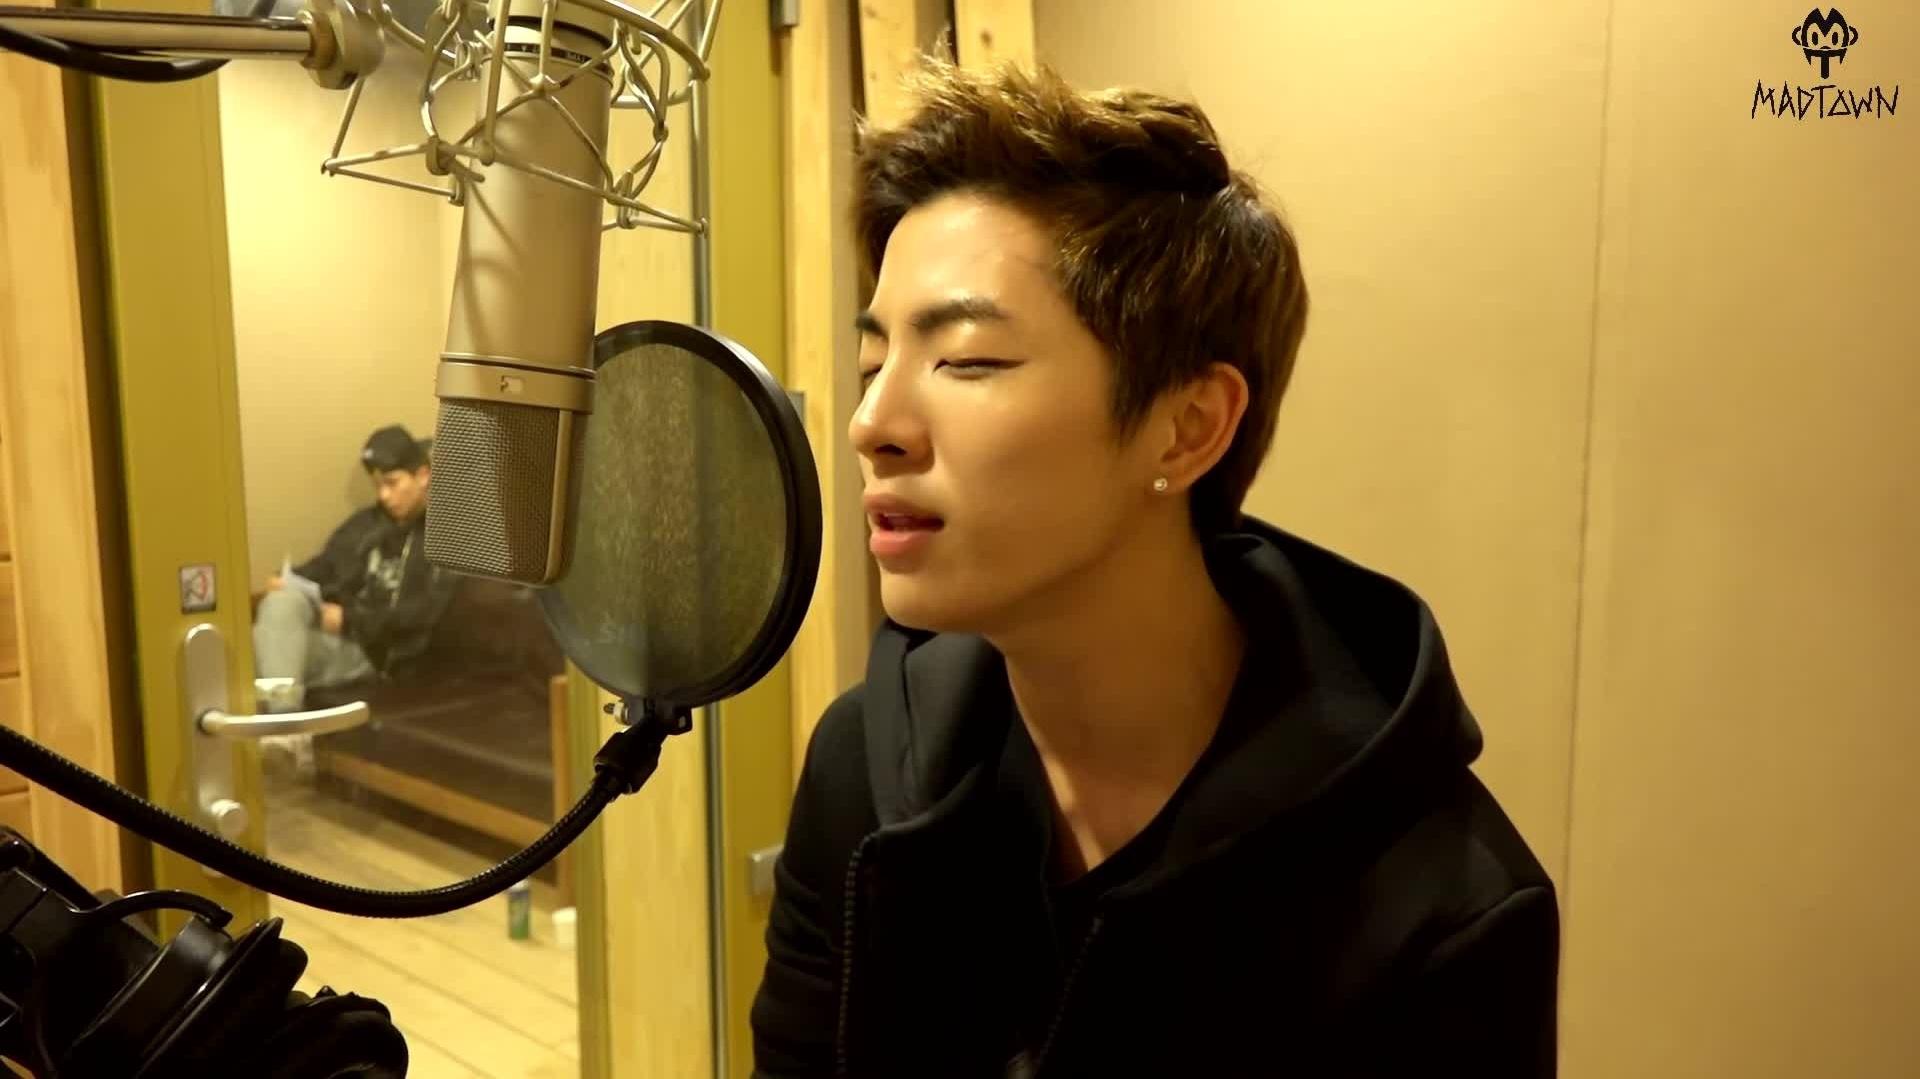 MADTOWN - If Only (LEEGEON COVER PROJECT PART 1)